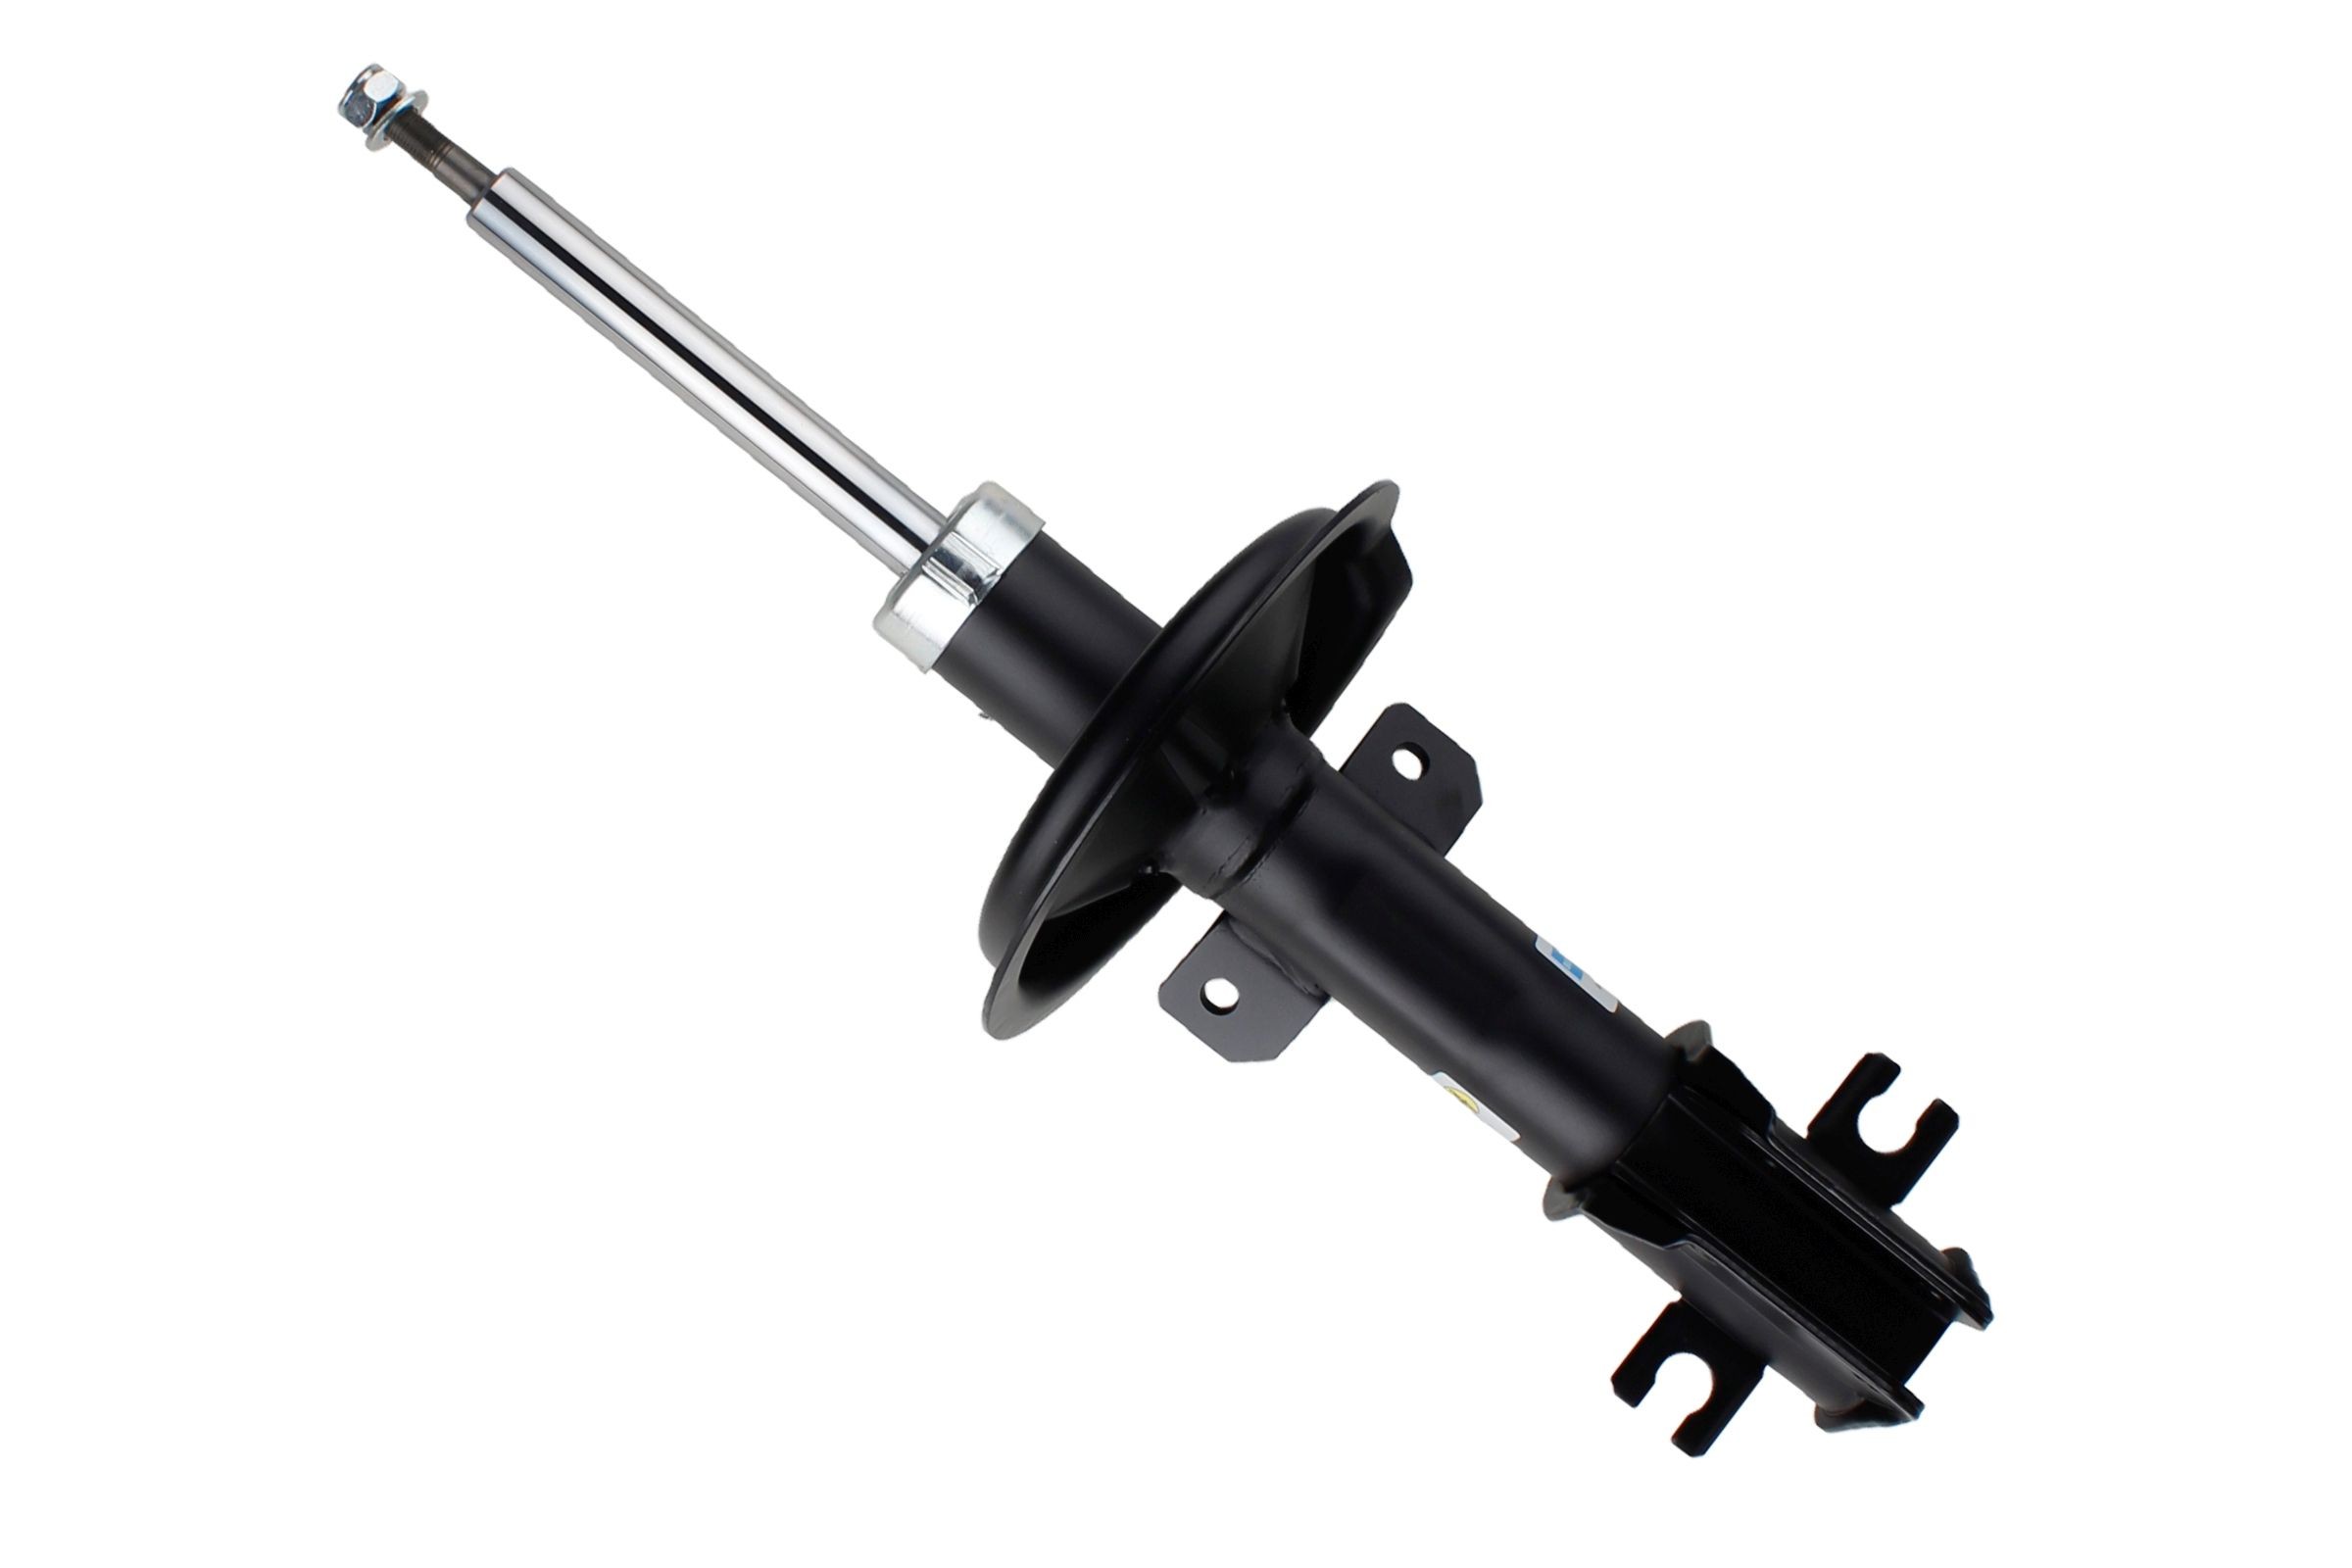 VNE-4675 BILSTEIN - B4 OE Replacement Front Axle, Gas Pressure, Twin-Tube, Suspension Strut, Top pin, Bottom Clamp Shocks 22-046758 buy